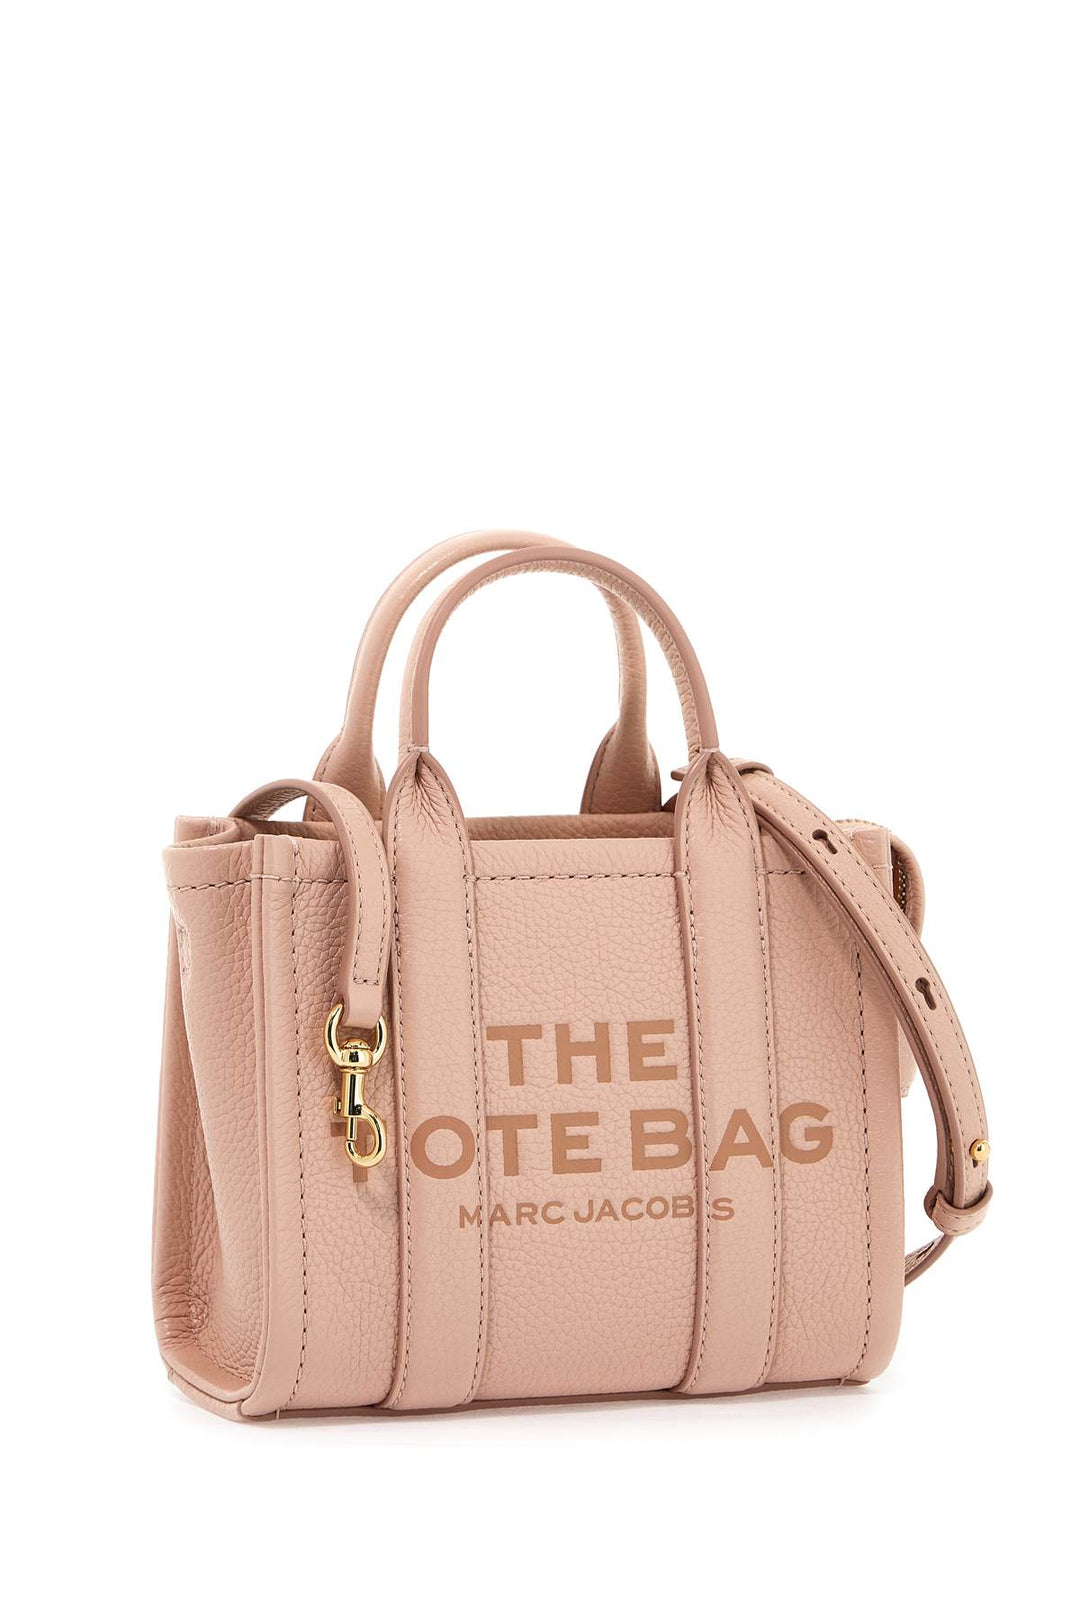 Marc Jacobs The Leather Mini Tote Bag   Pink